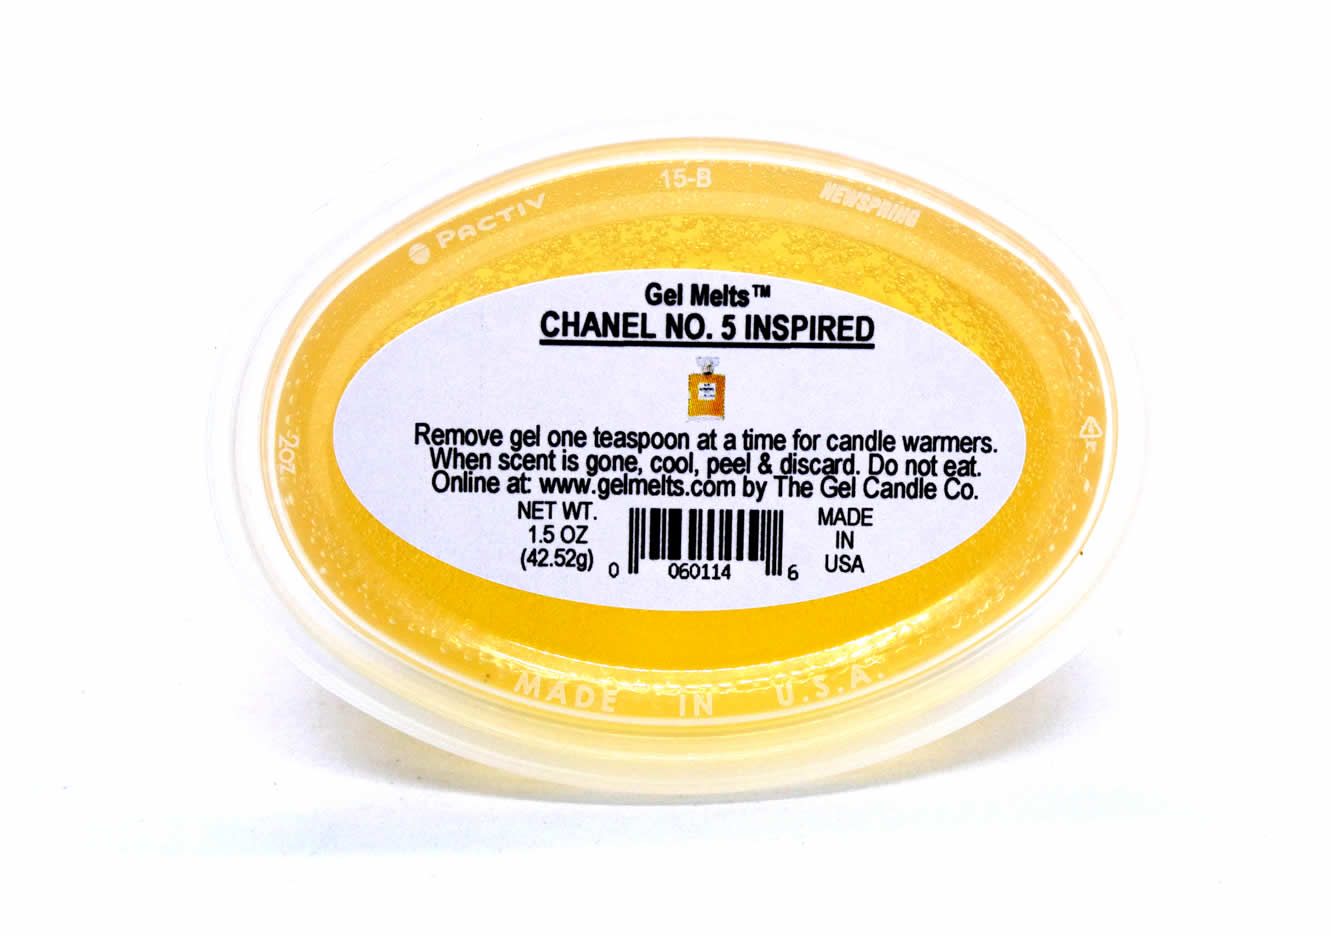 Chanel No. 5 Inspired Scented Gel Melts™ for warmers 3 pack